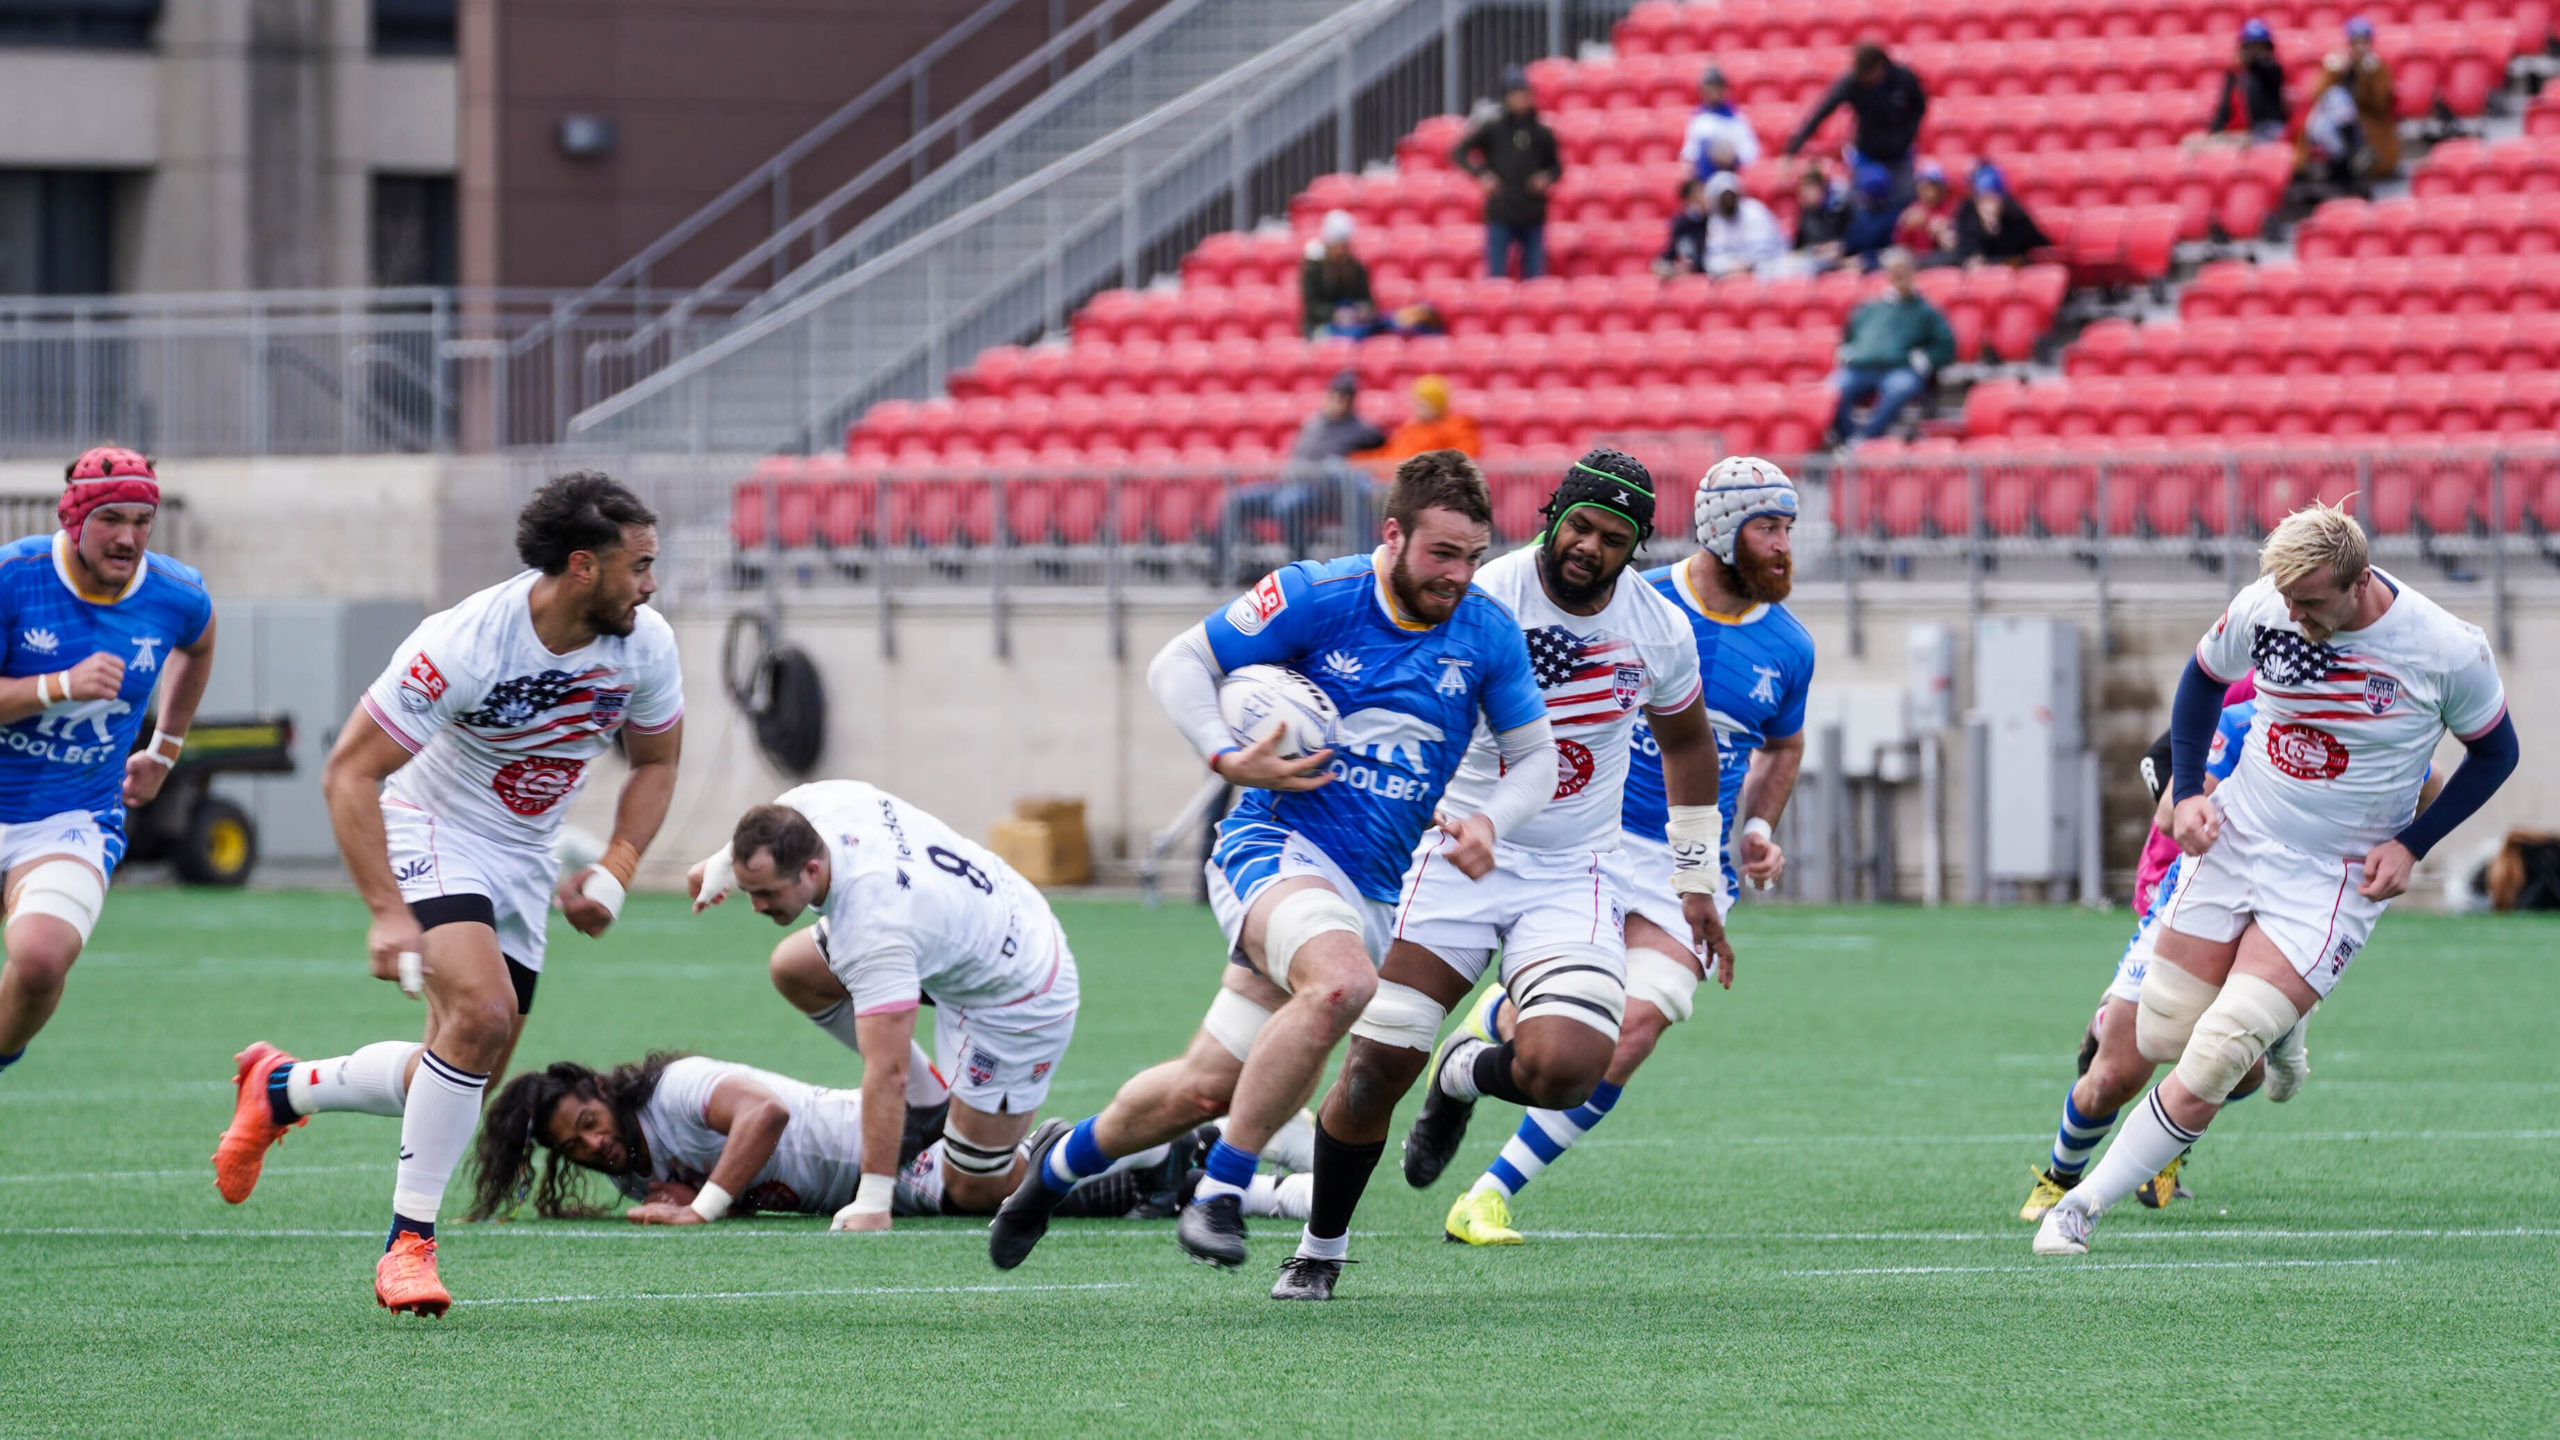 Arrows Stave Off Late DC Surge for Bonus-Point Home Win